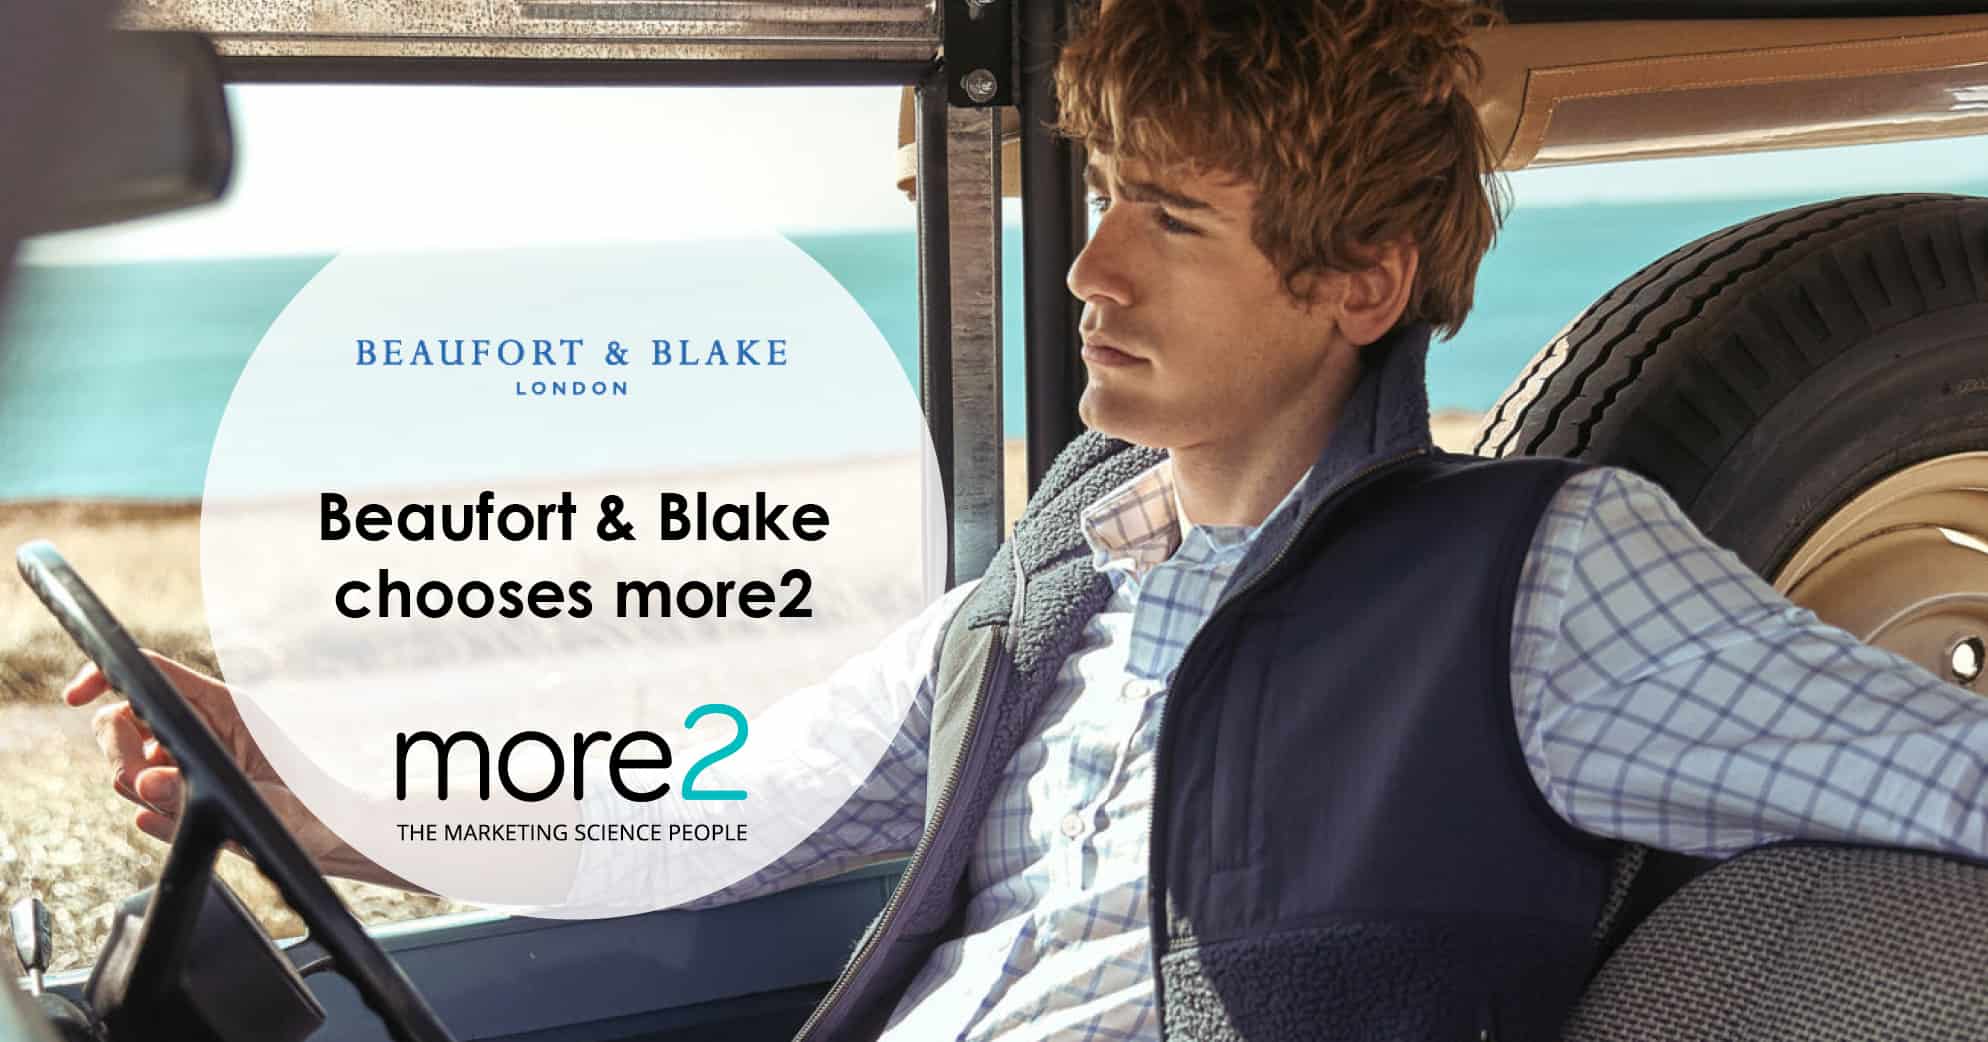 Beaufort & Blake partners with more2